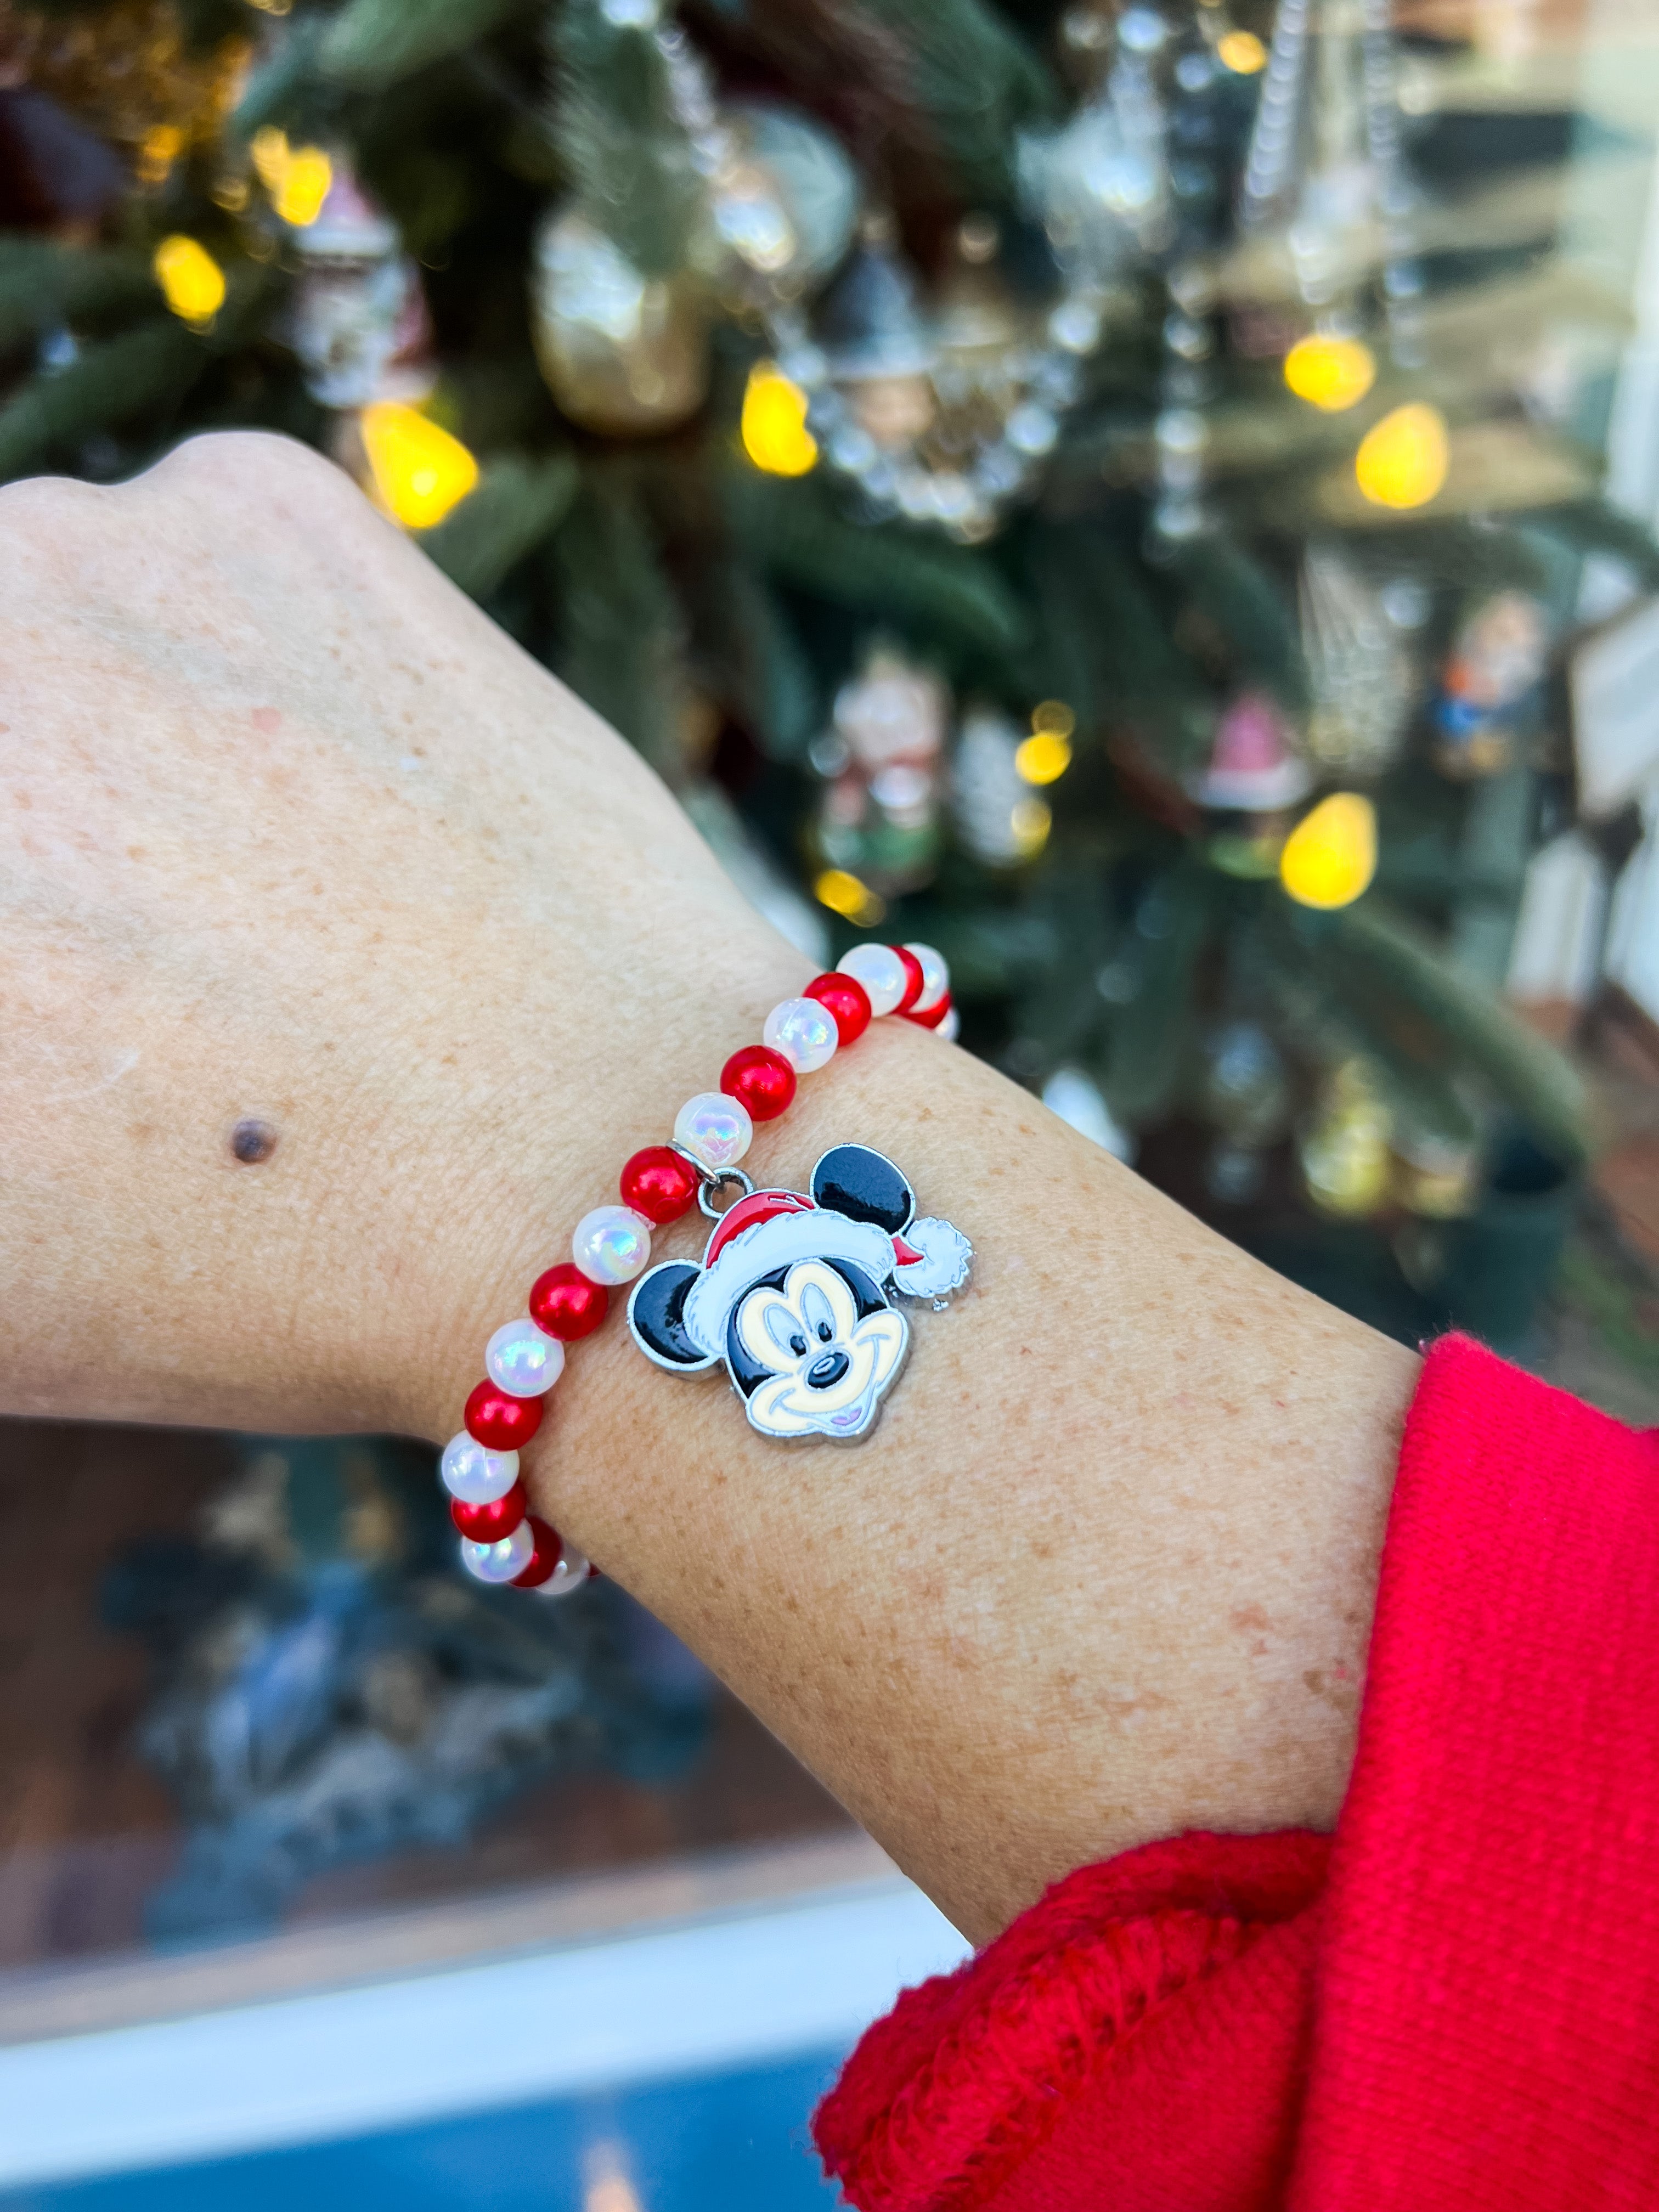 New on shopDisney (11/15/18): 5 Mickey Mouse Jewelry Pieces to Celebrate  His 90th Birthday